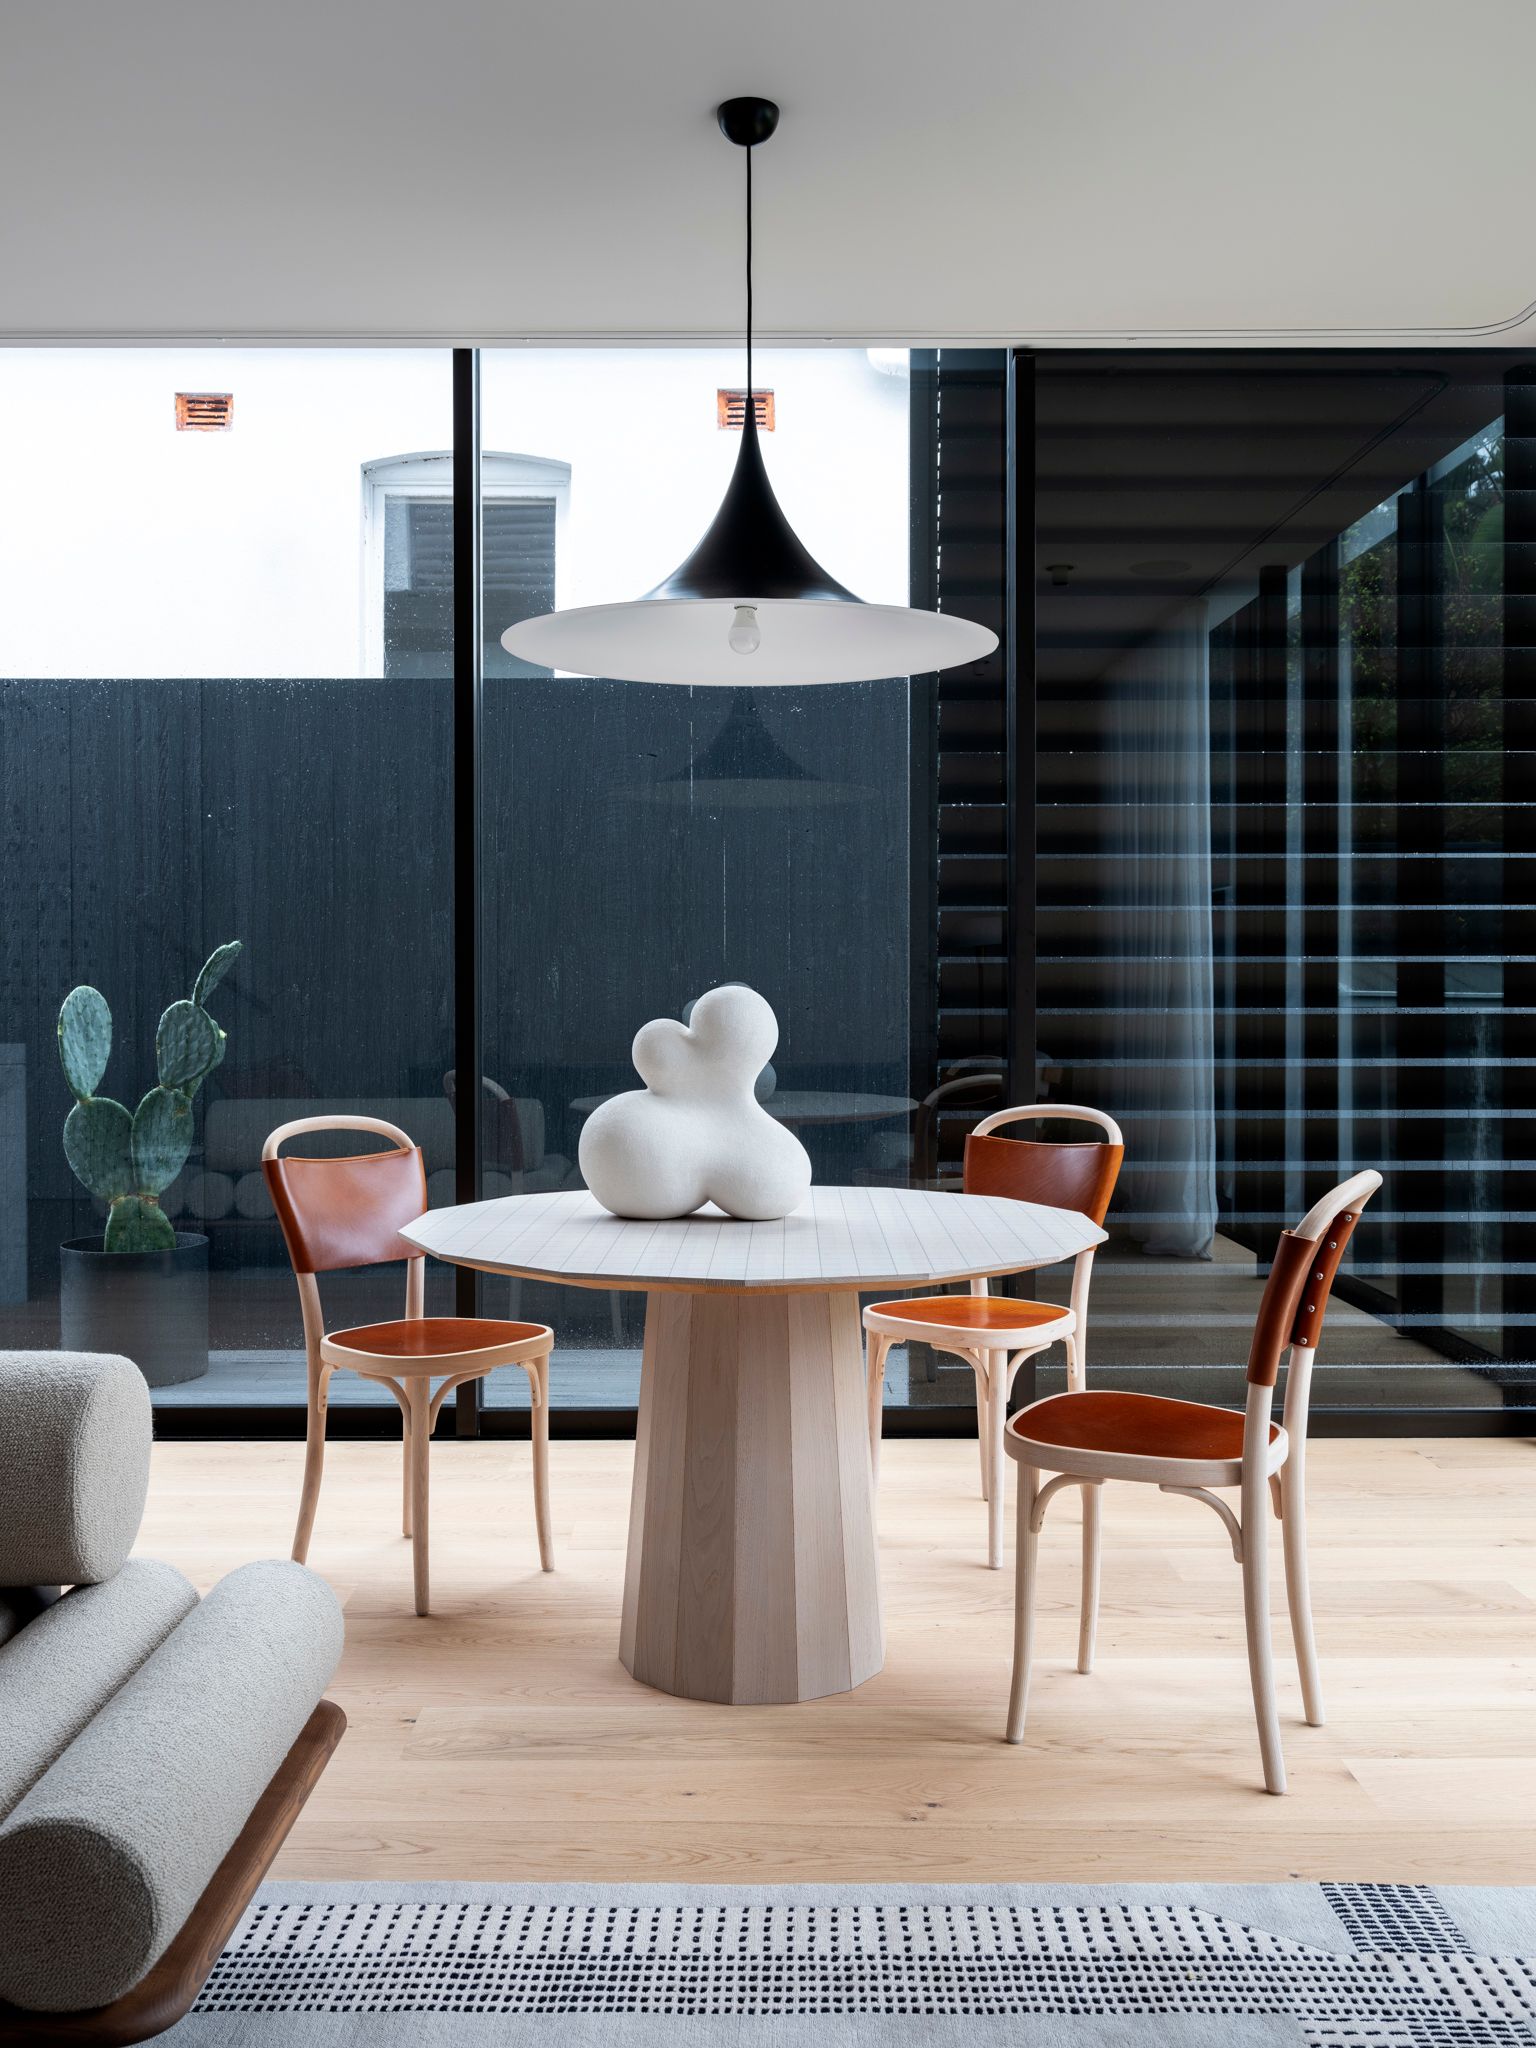 Bondi Beach House by Carla Middleton Architecture. Dining room table